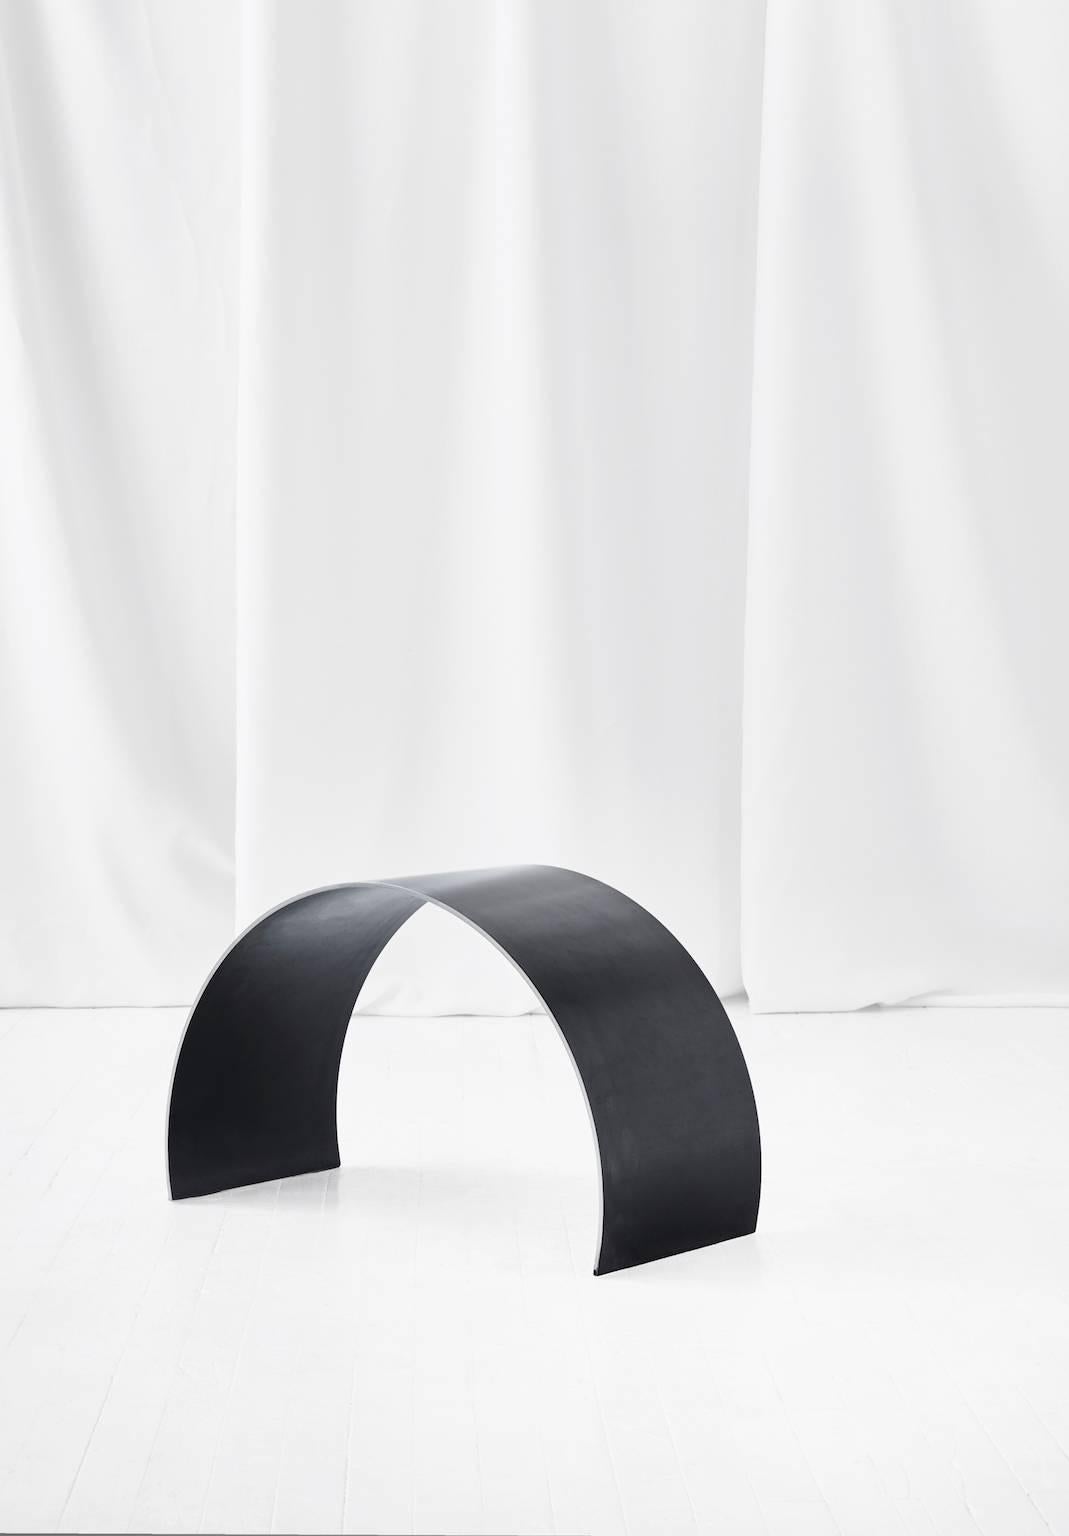 Equal parts sculpture and stool, the waxed raw steel arc stool by ASH NYC is both functional and beautiful.

Inspired by forms from great artists like Richard Serra, the stool lends itself to being a standout piece in any home that doubles as a